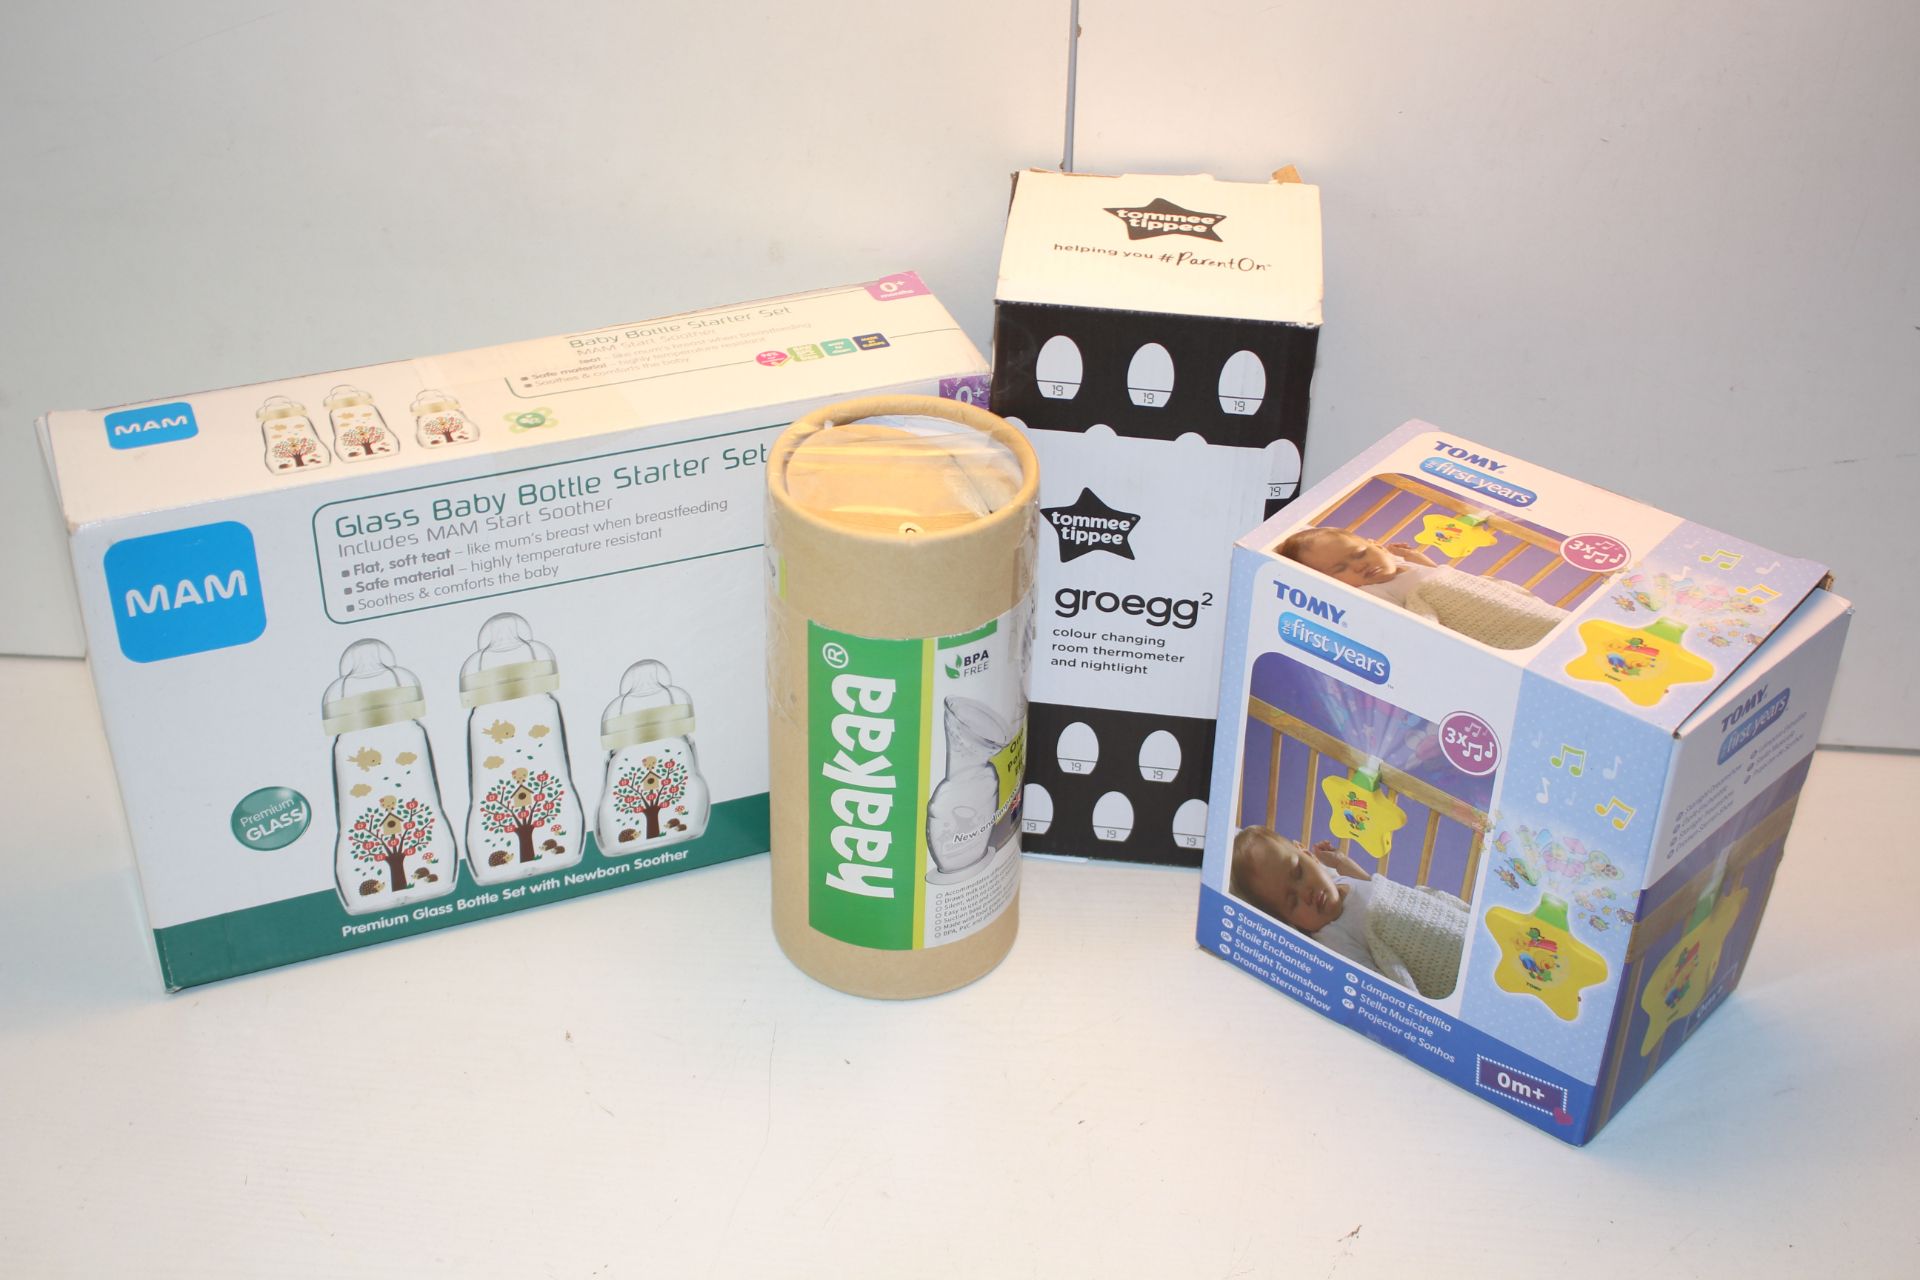 4X BOXED ASSORTED CHILDCARE ITEMS BY MAM, TOMY, TOMMEE TIPPEE & OTHER (IMAGE DEPICTS STOCK)Condition